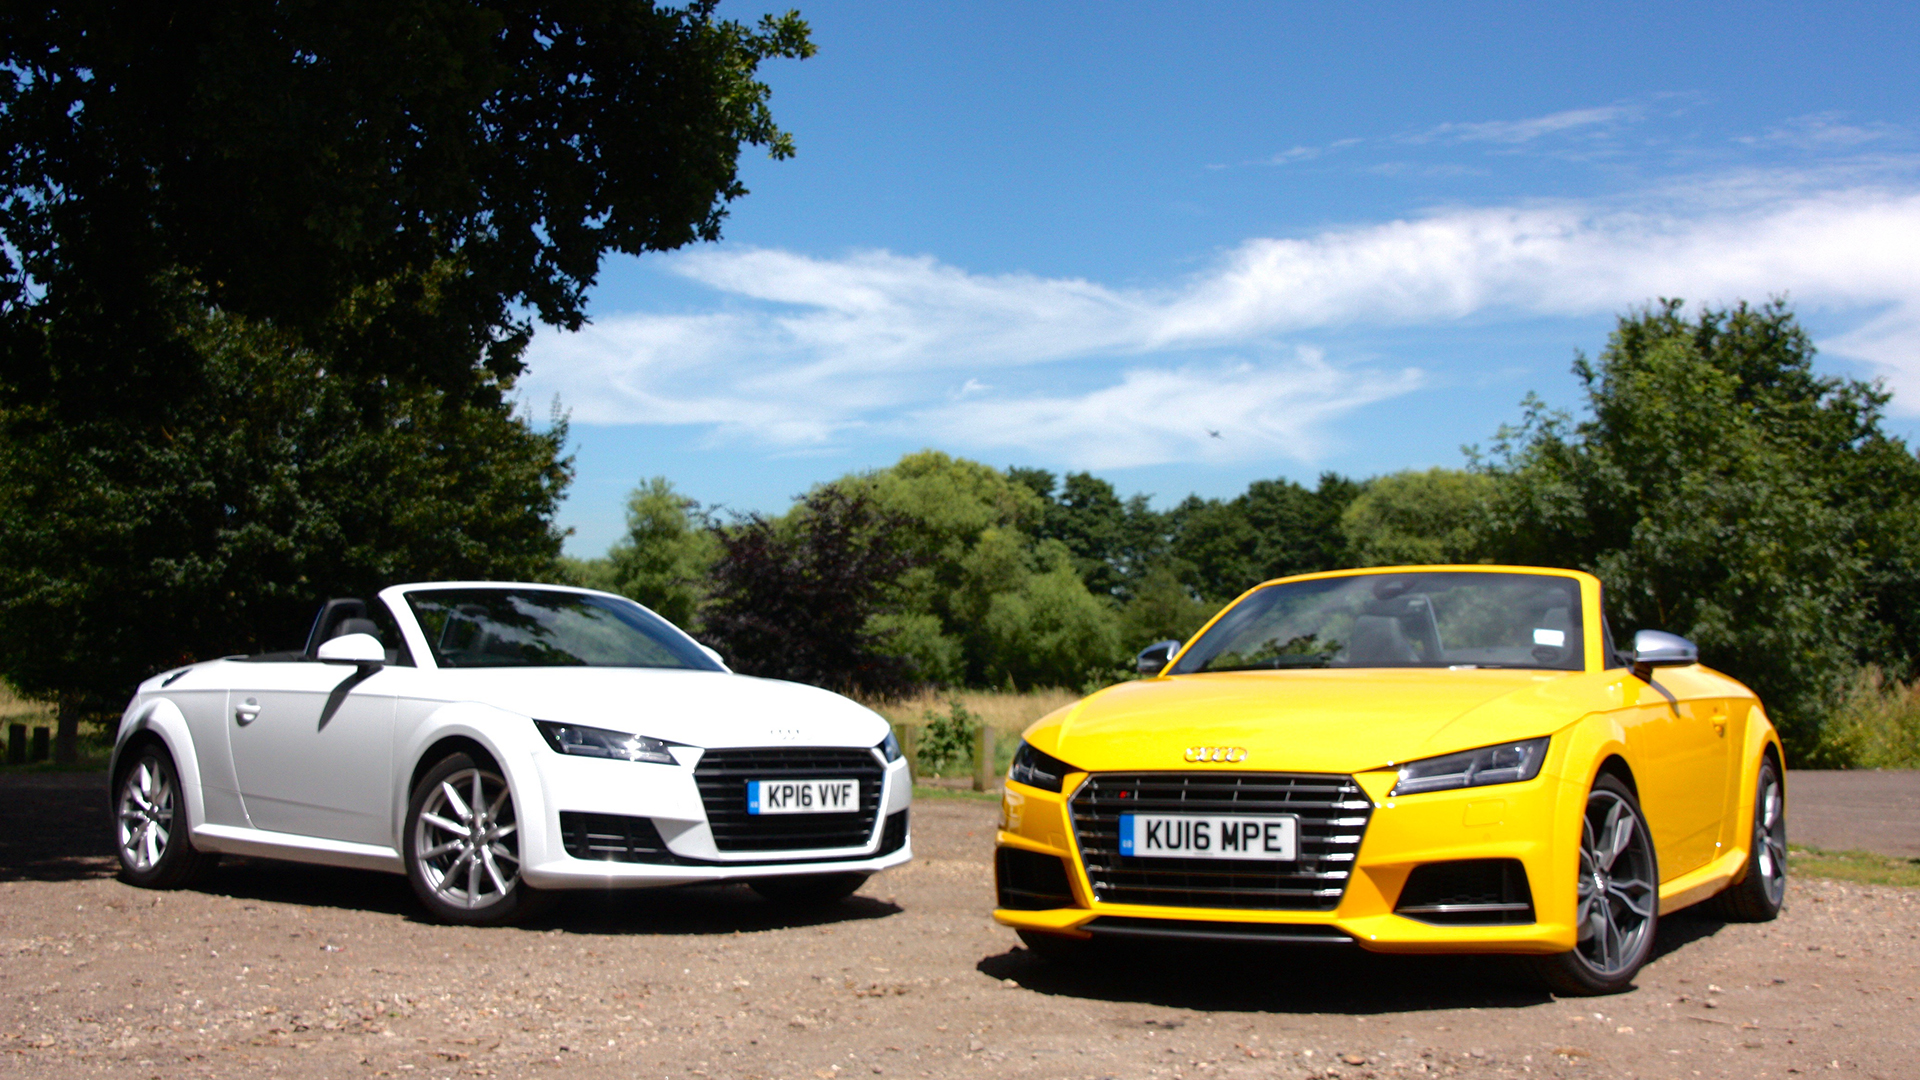 Check out Audi TT Roadster Convertible review: BuzzScore Rating, price details, trims,